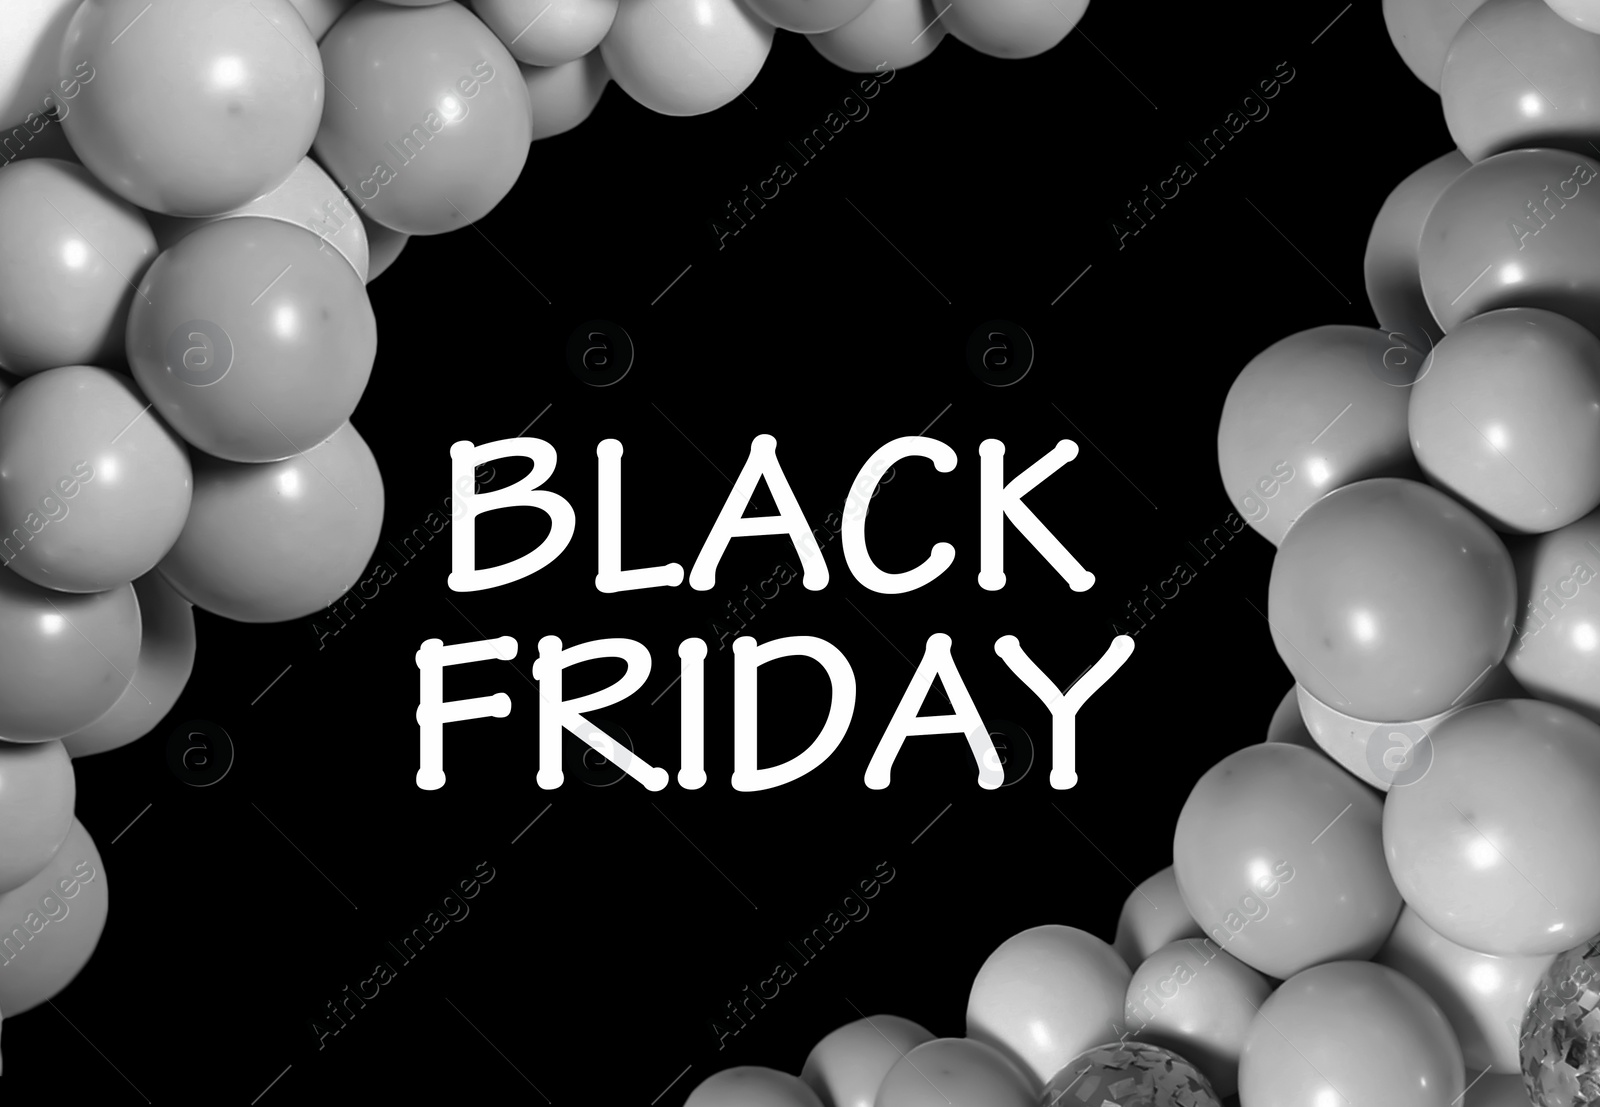 Image of Text BLACK FRIDAY and balloons on dark background